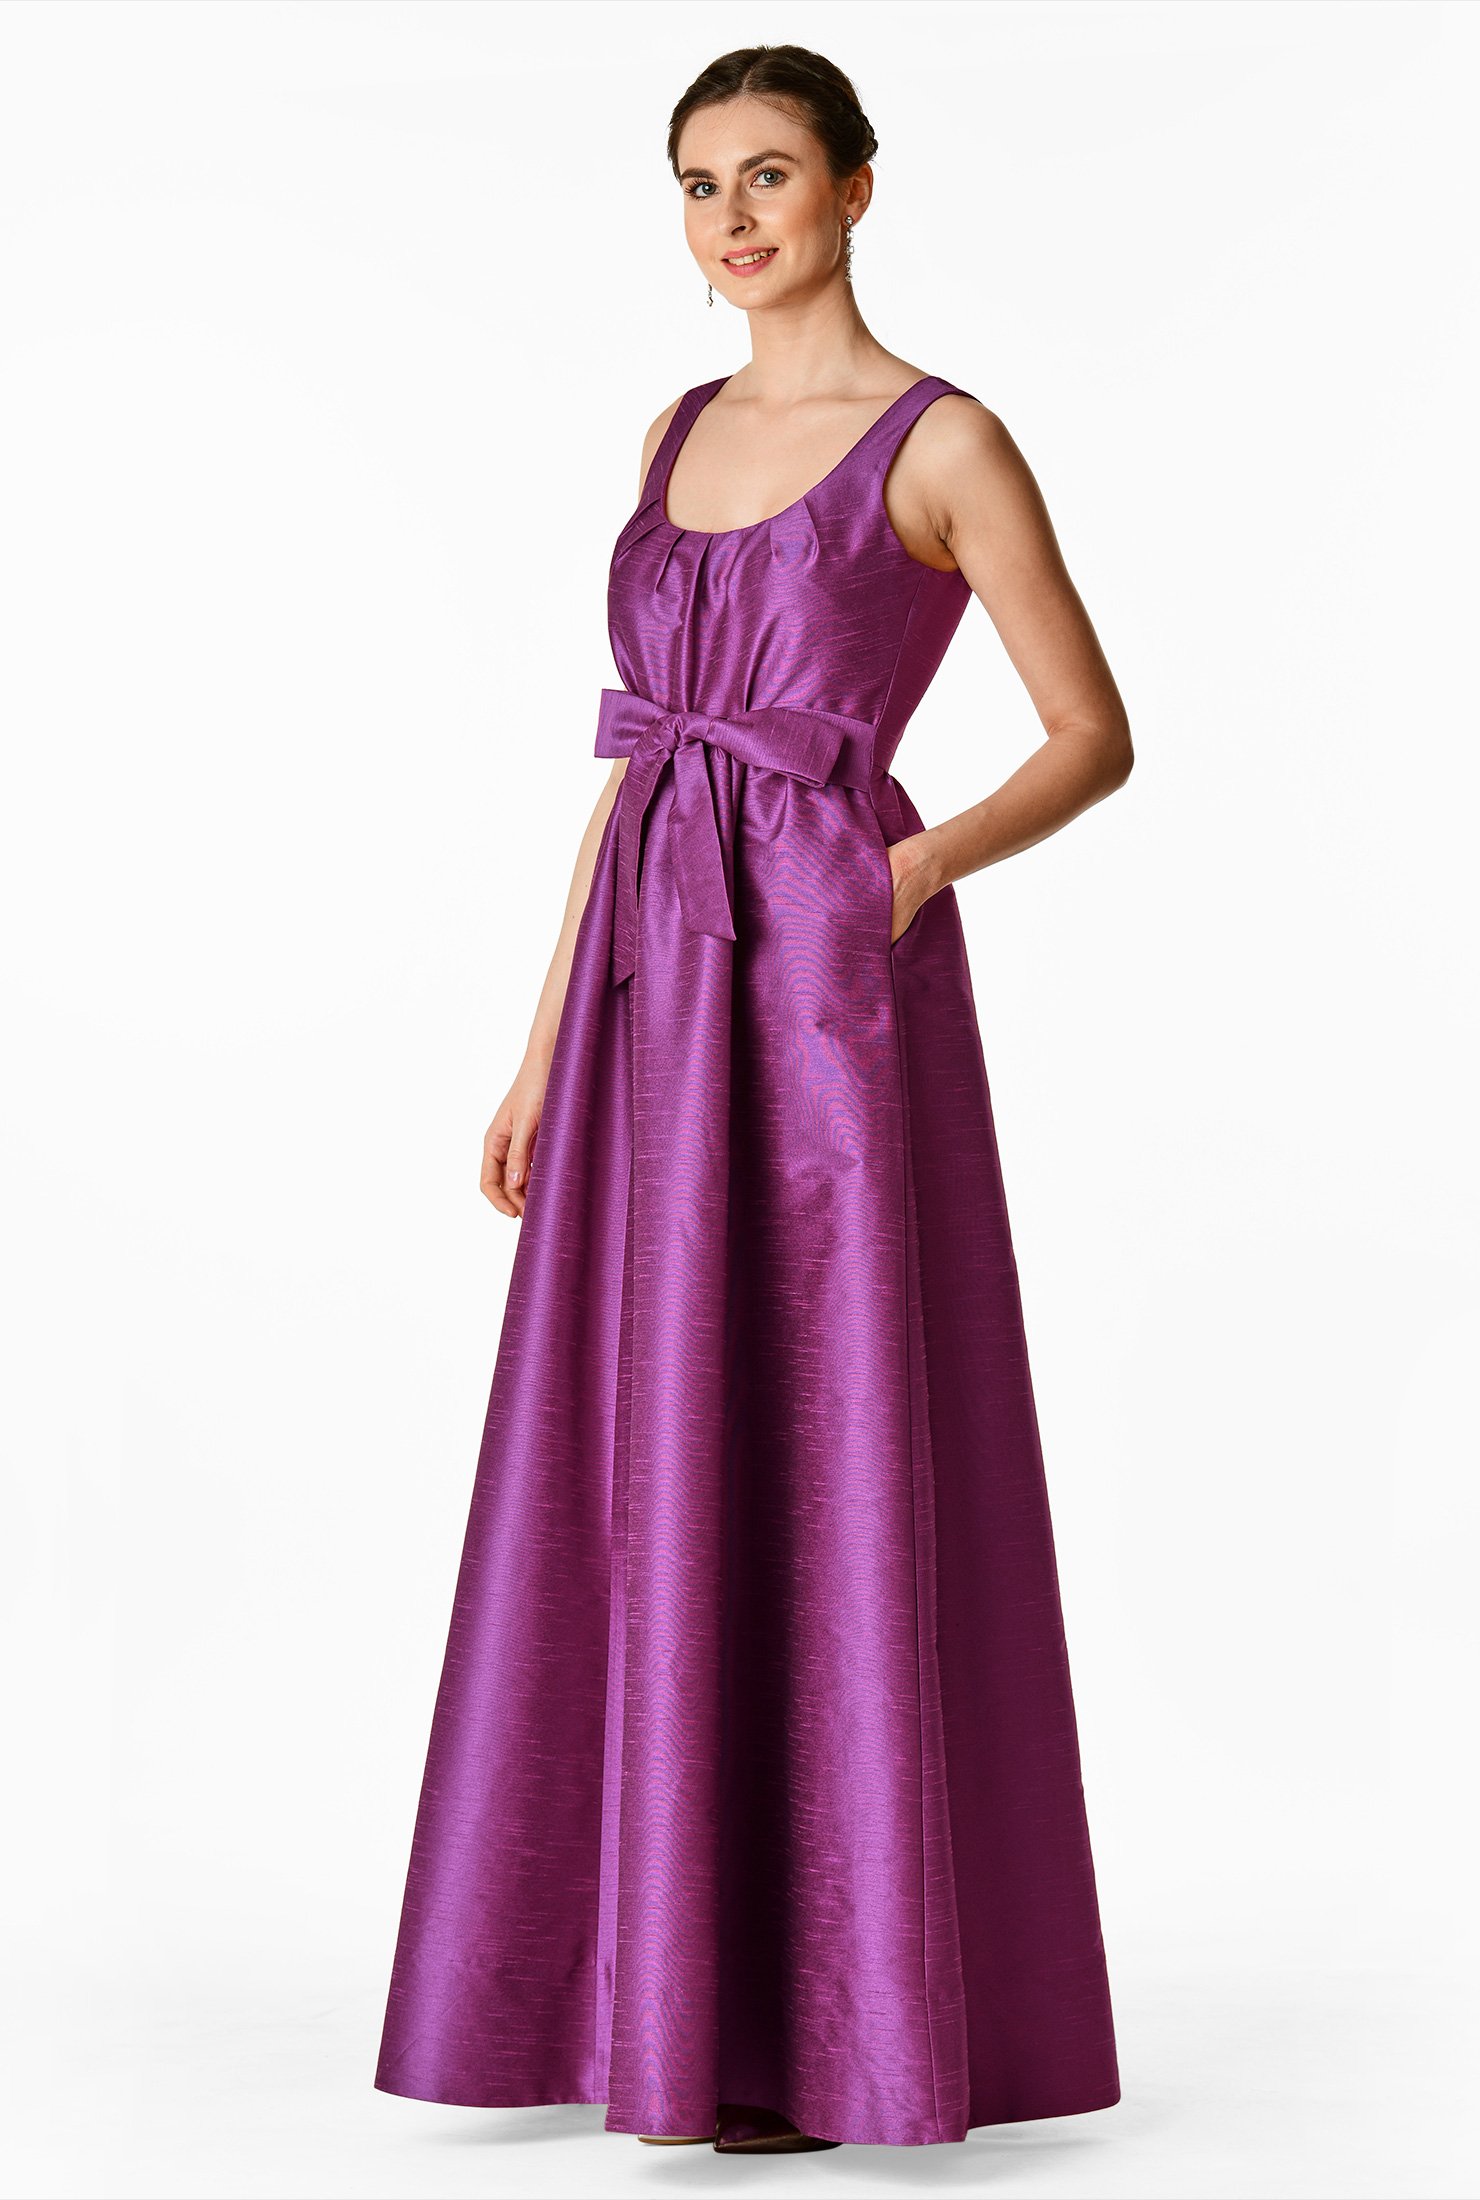 A bow-tie front lends feminine appeal to our polydupioni dress, cinched in with  attached sash-ties at the seamed waist above the ruched pleat full skirt.